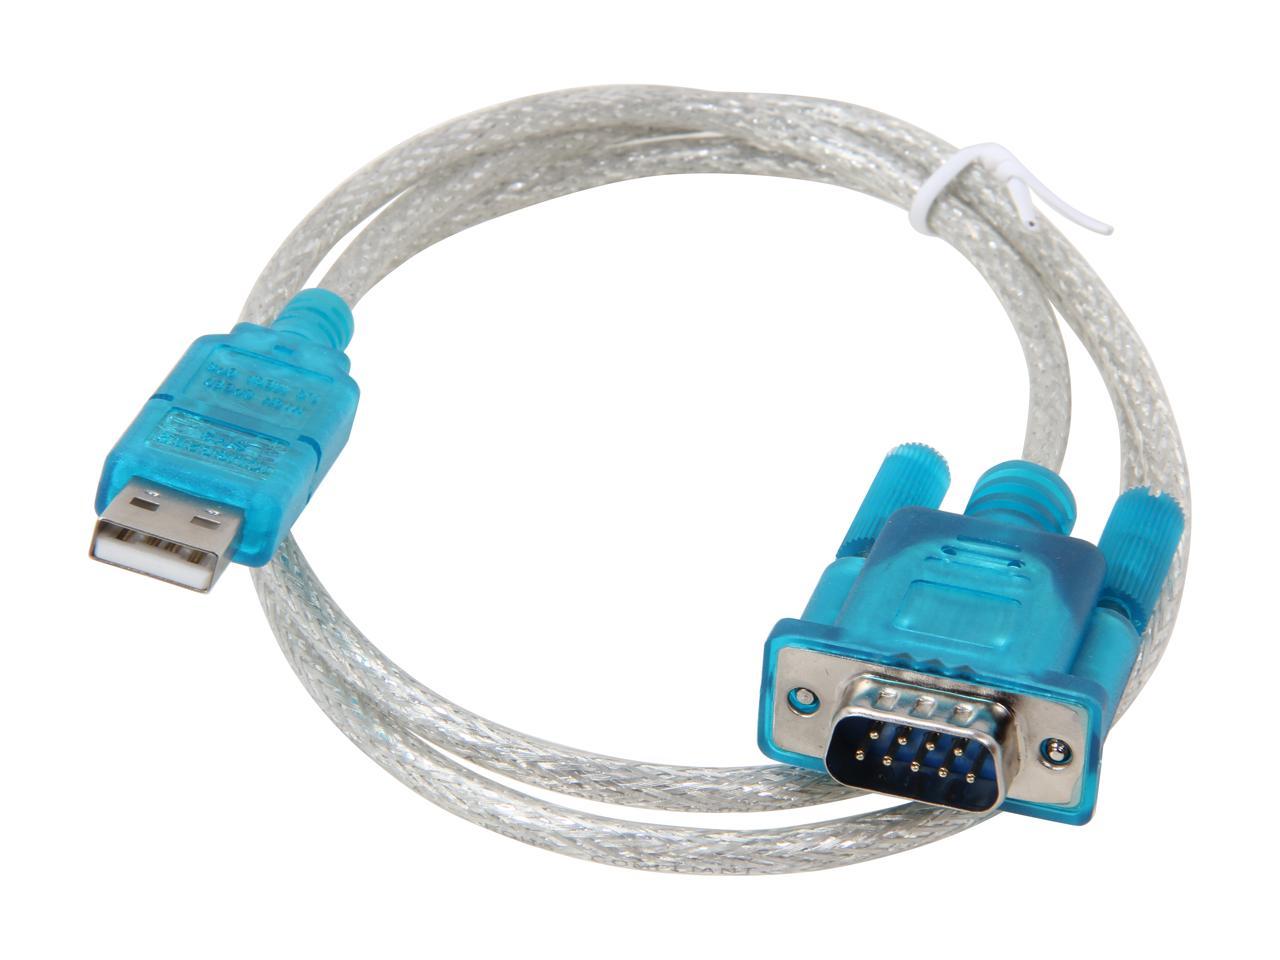 what is prolific usb to serial comm port